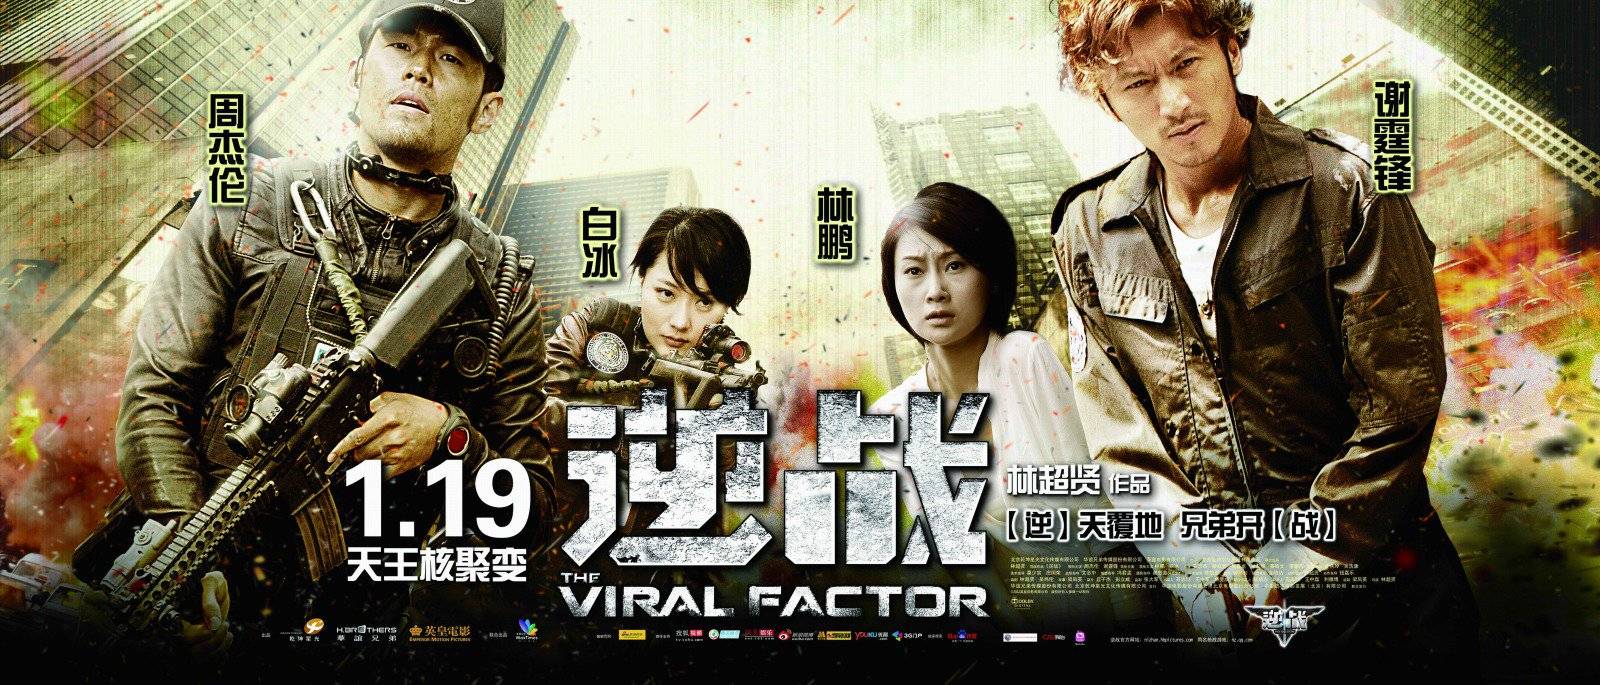 The Viral Factor / The Viral Factor (2012)